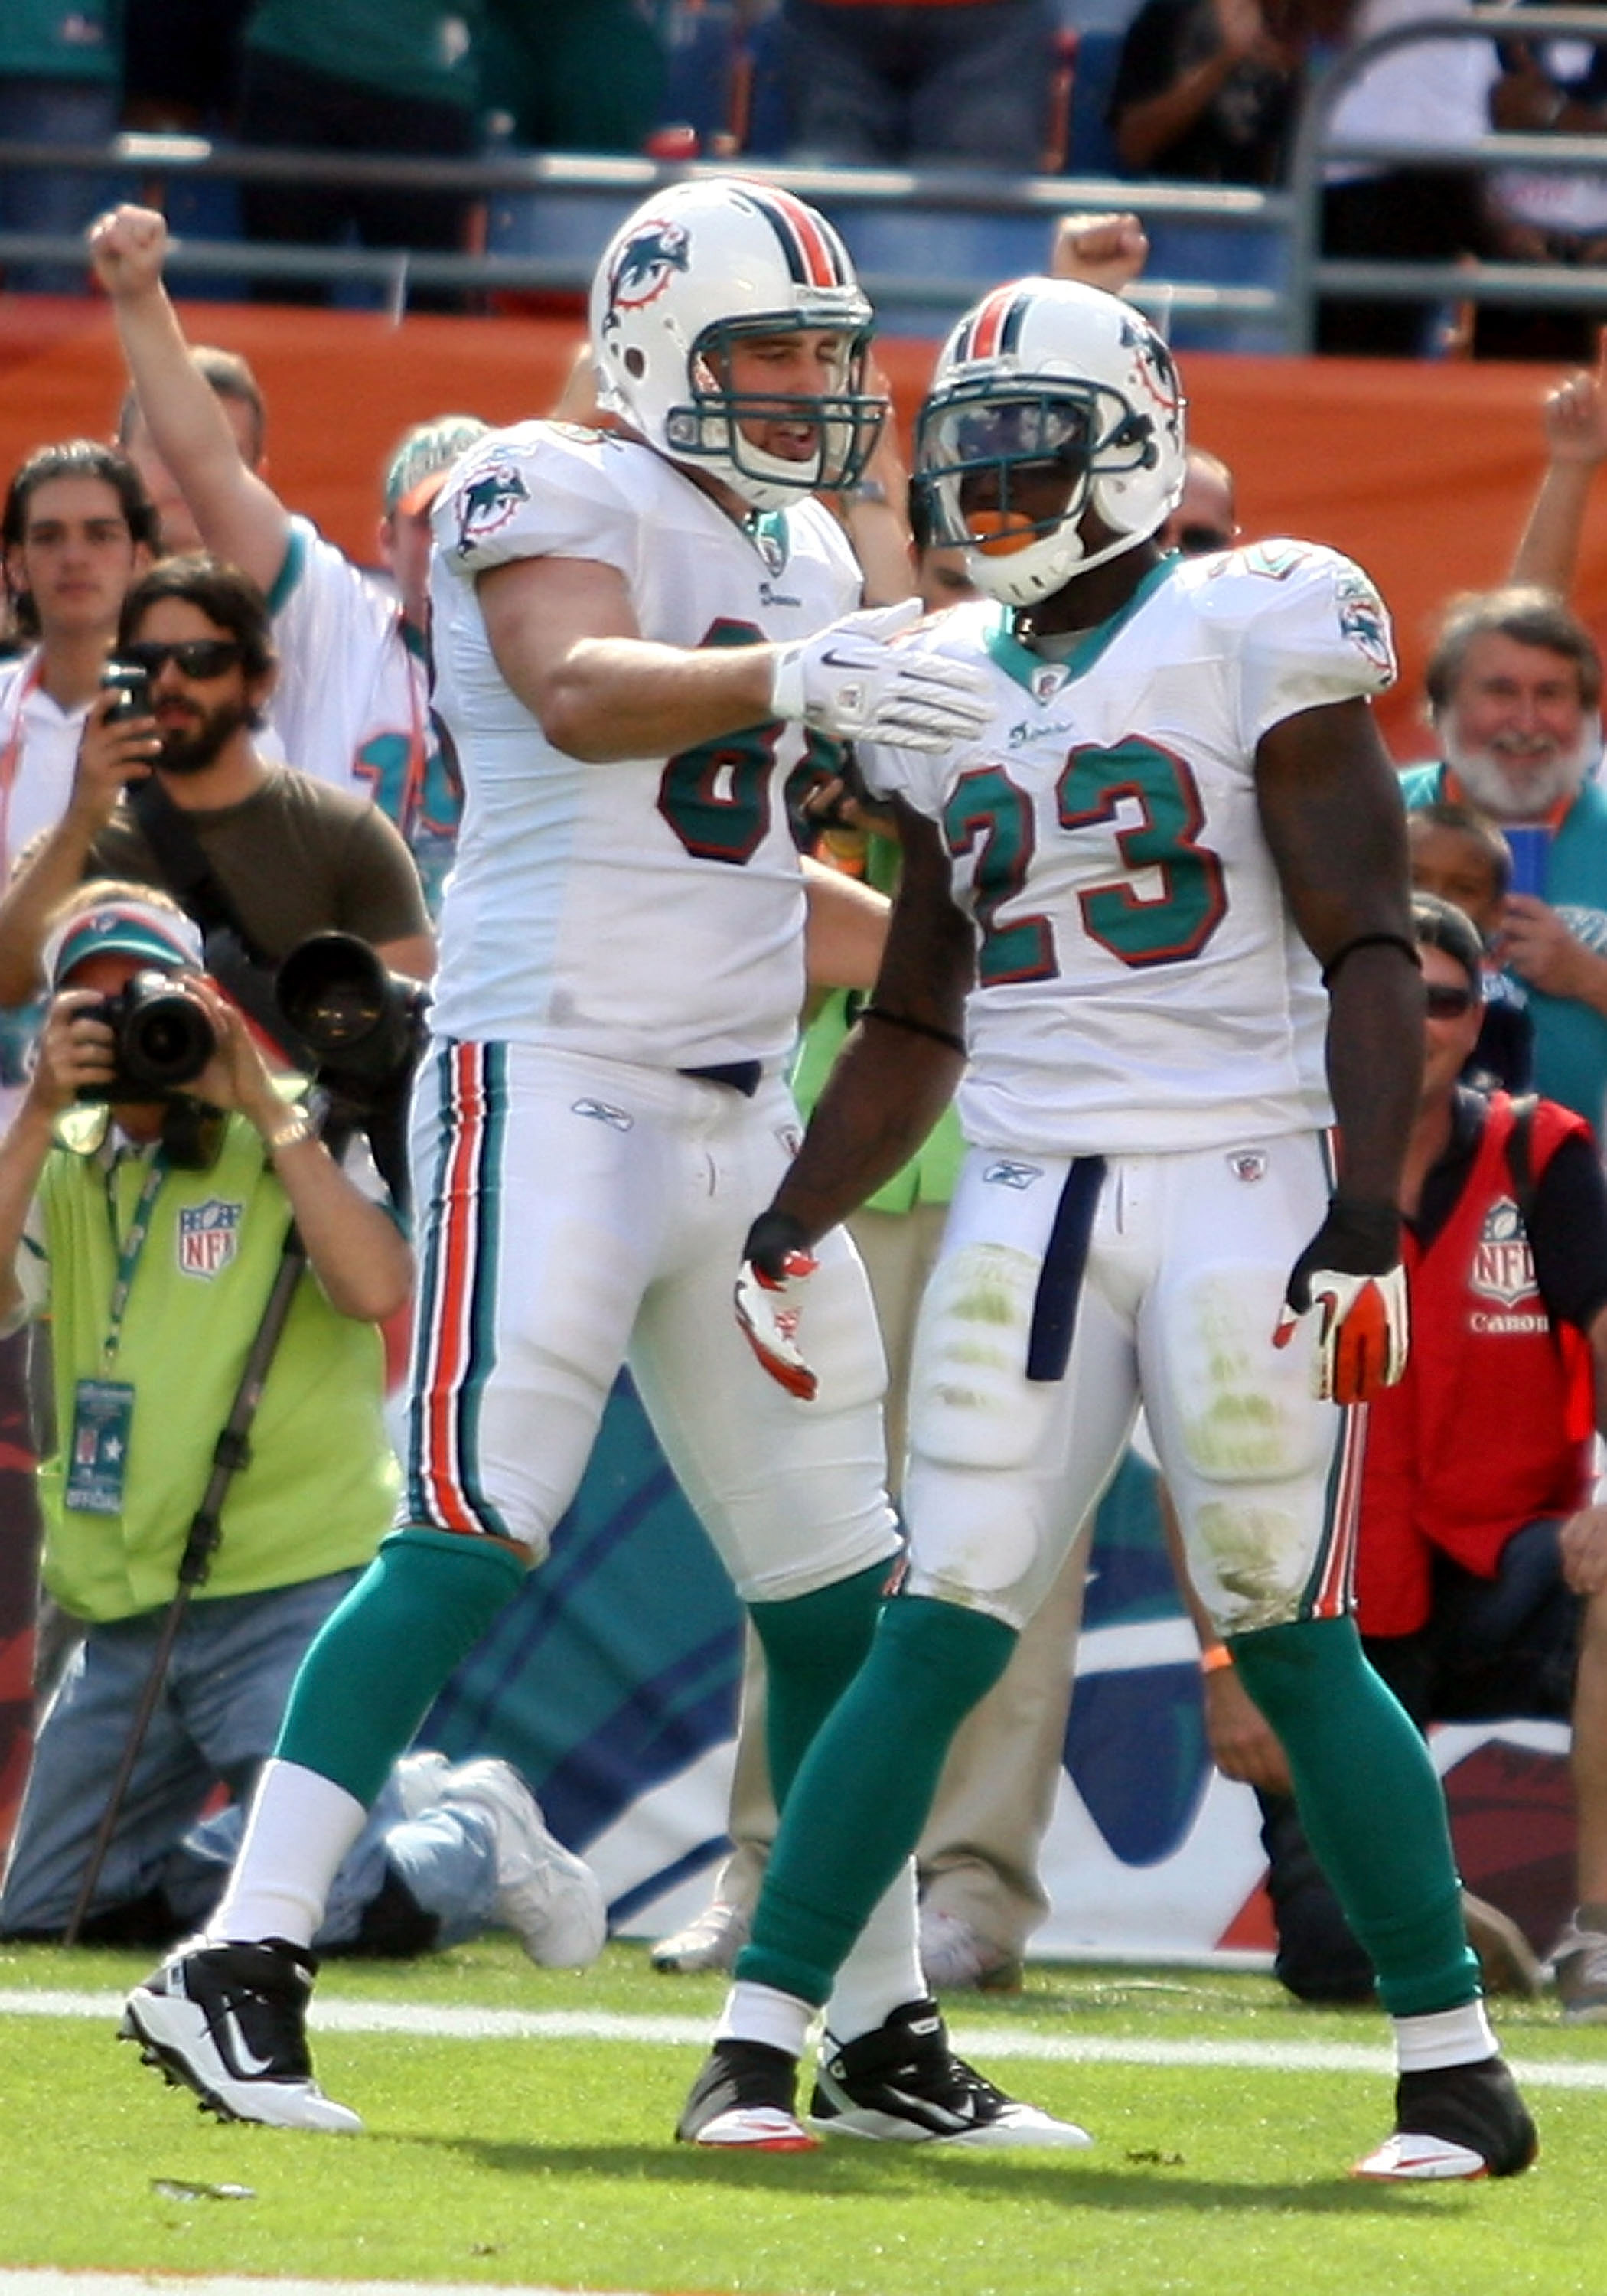 MIAMI - NOVEMBER 14:  Running Back Ronnie Brown #23 of the Miami Dolphins celebrates a touchdown with teammate Anthony Fasano #80 against the Tennessee Titans at Sun Life Stadium on November 14, 2010 in Miami, Florida.  (Photo by Marc Serota/Getty Images)